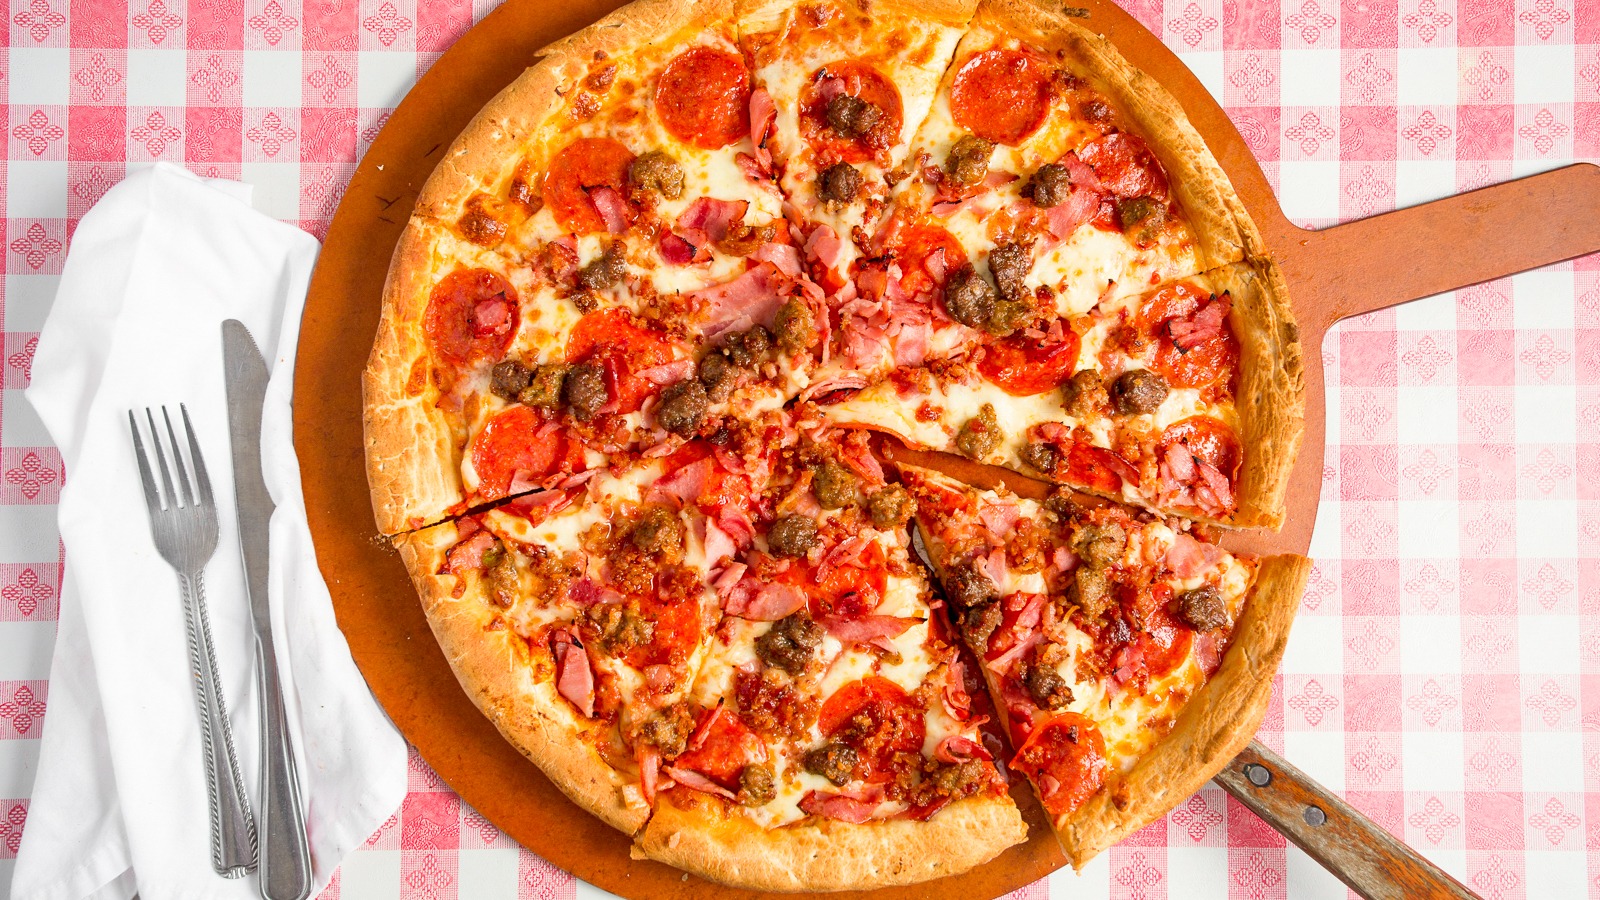 The "All Meat Pie" Pizza